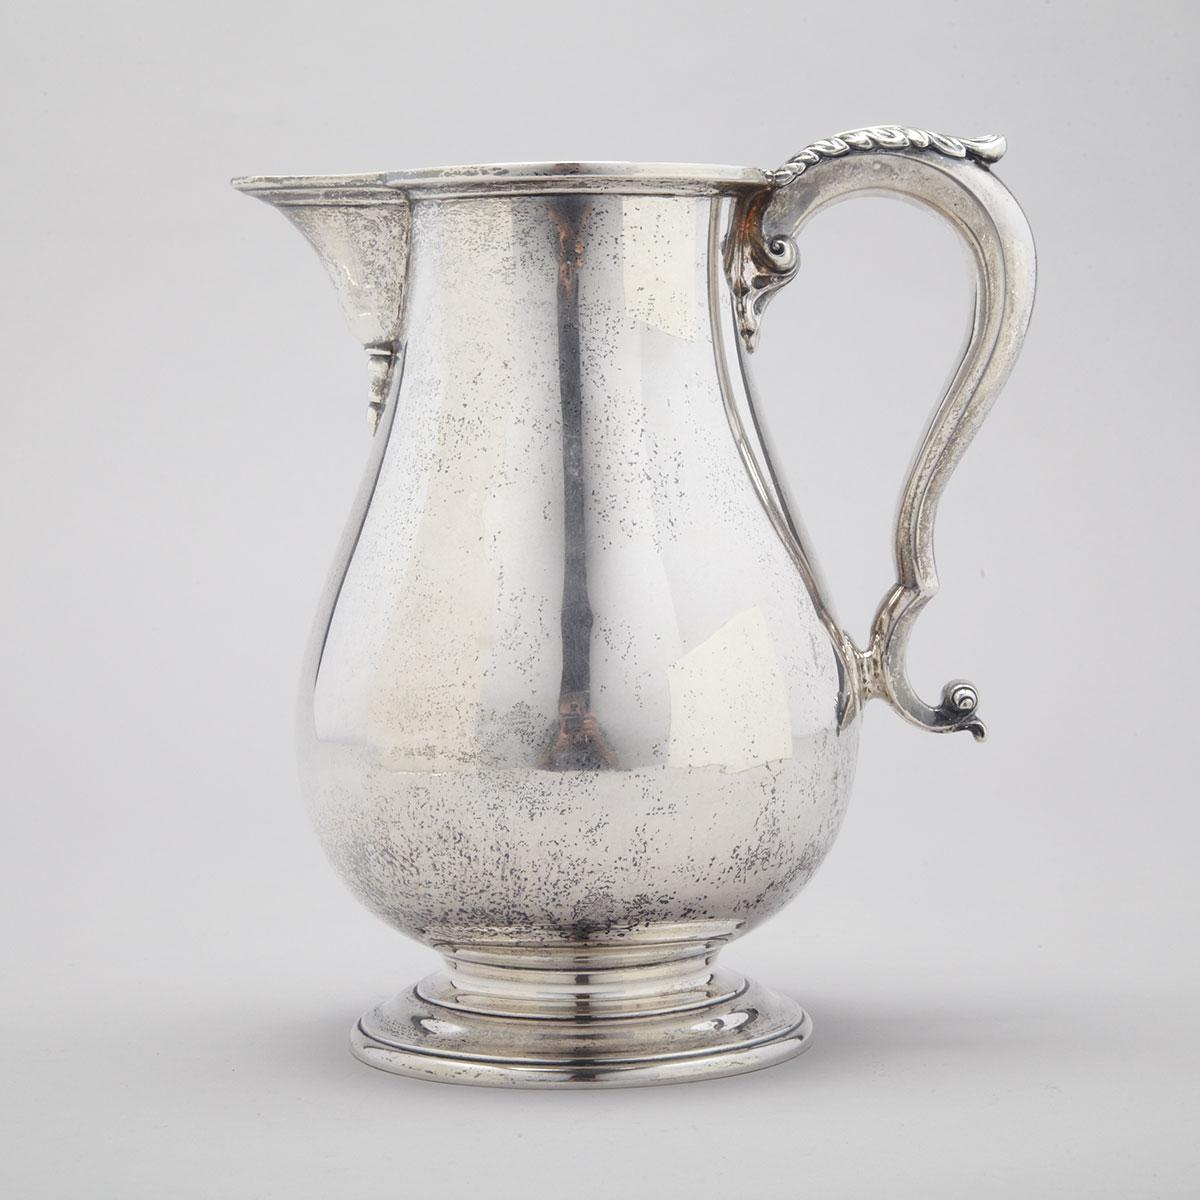 Canadian Silver Plain Baluster Water Jug, Henry Birks & Sons, Montreal, Que., 1952